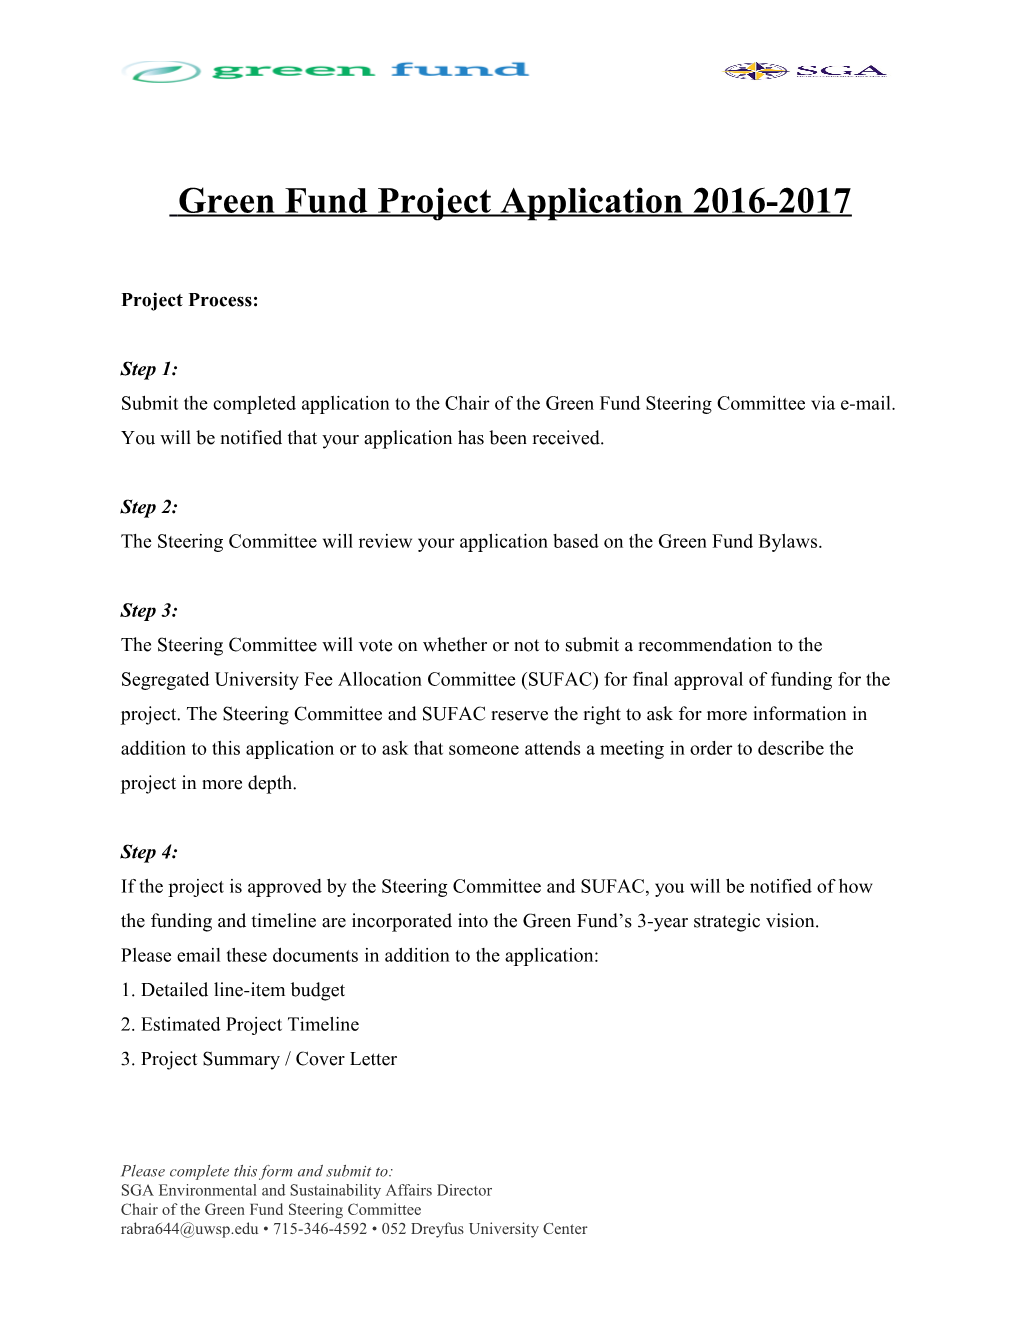 Green Fund Project Application 2016-2017